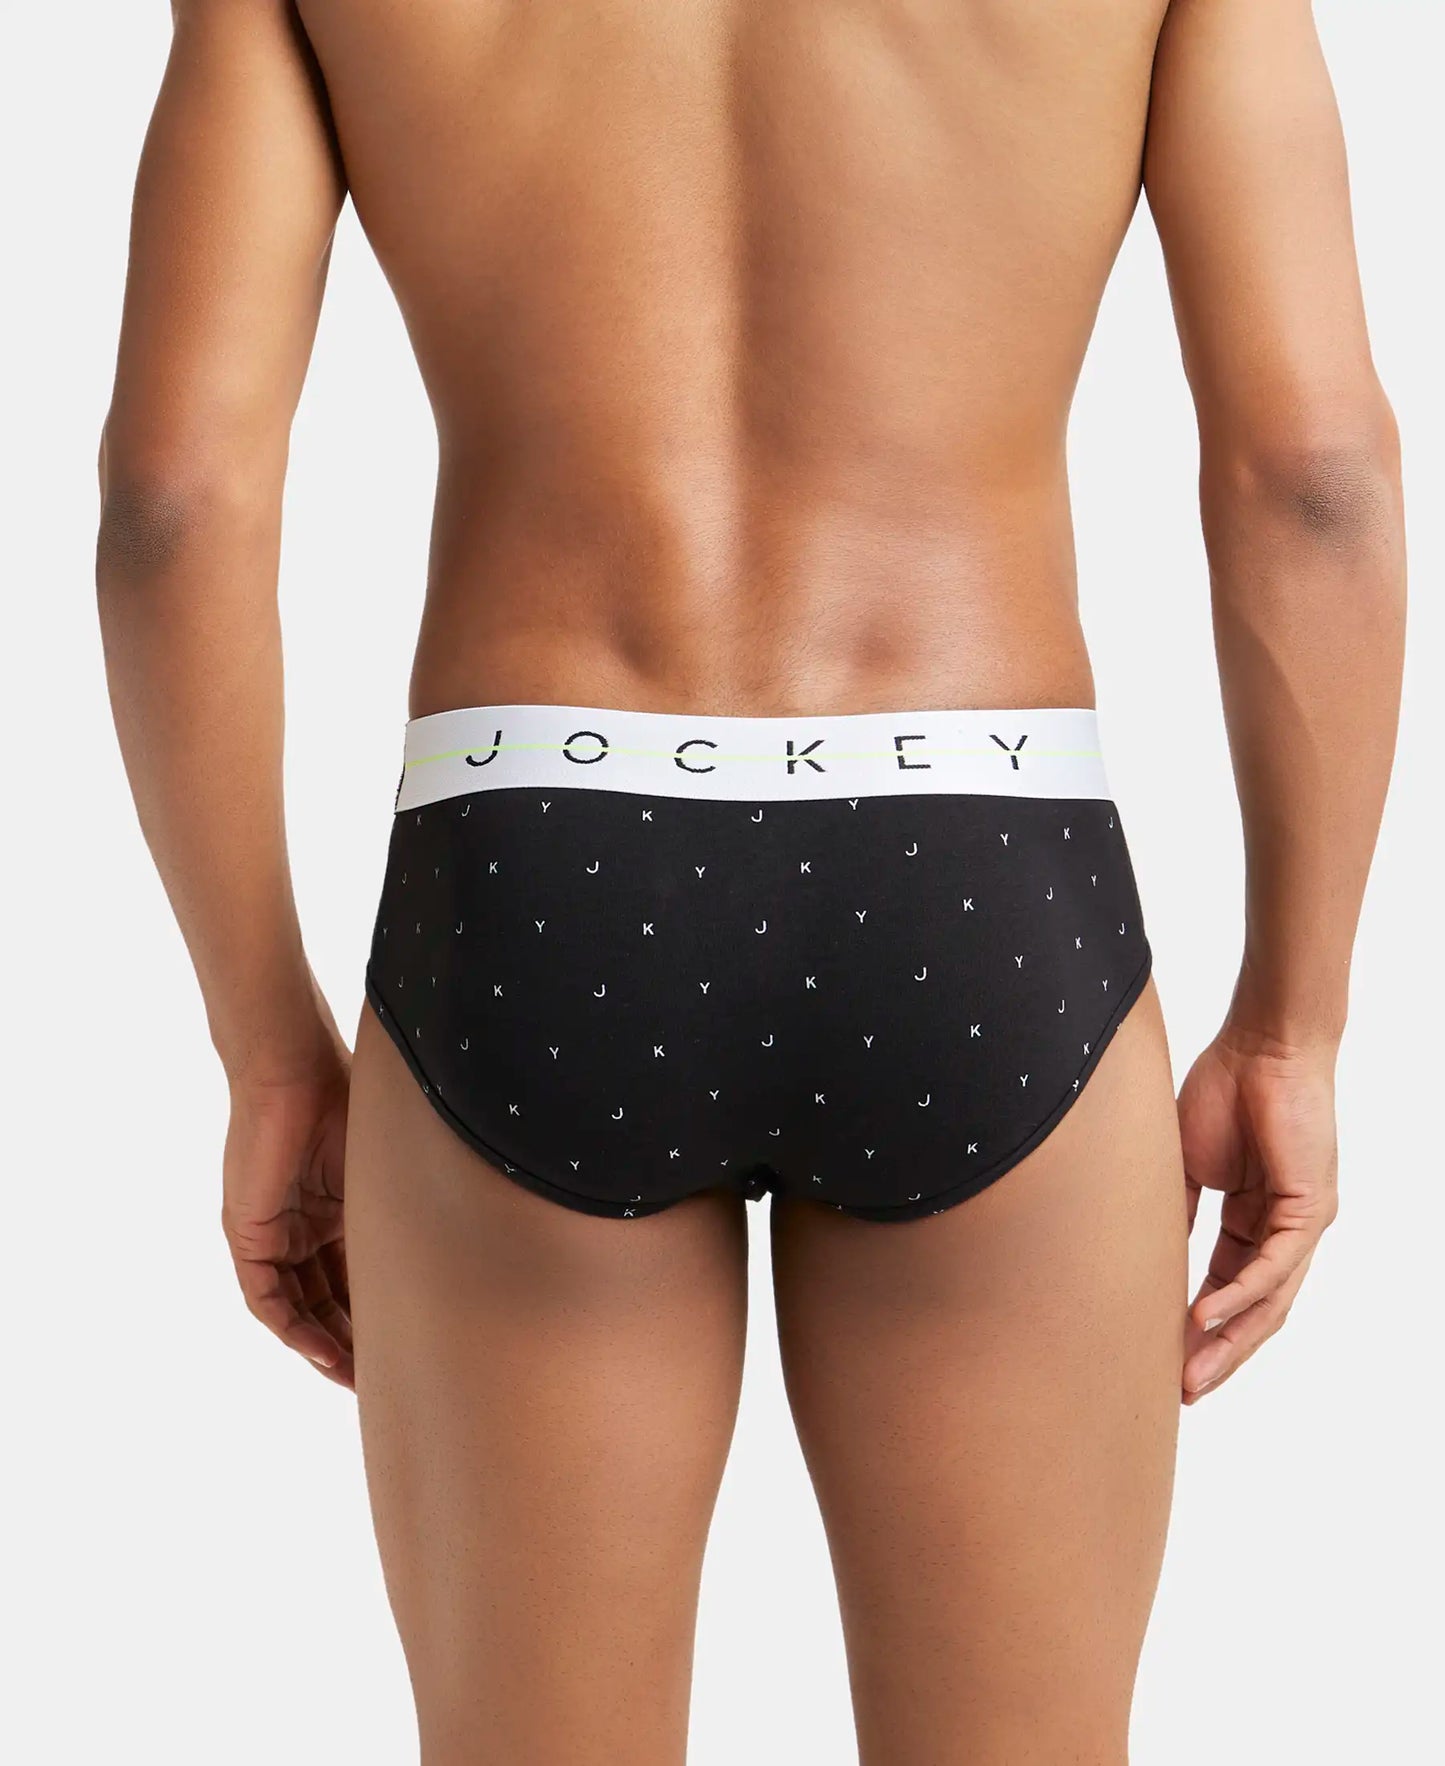 Super Combed Cotton Elastane Printed Brief with Ultrasoft Waistband - White with Black Des07-3